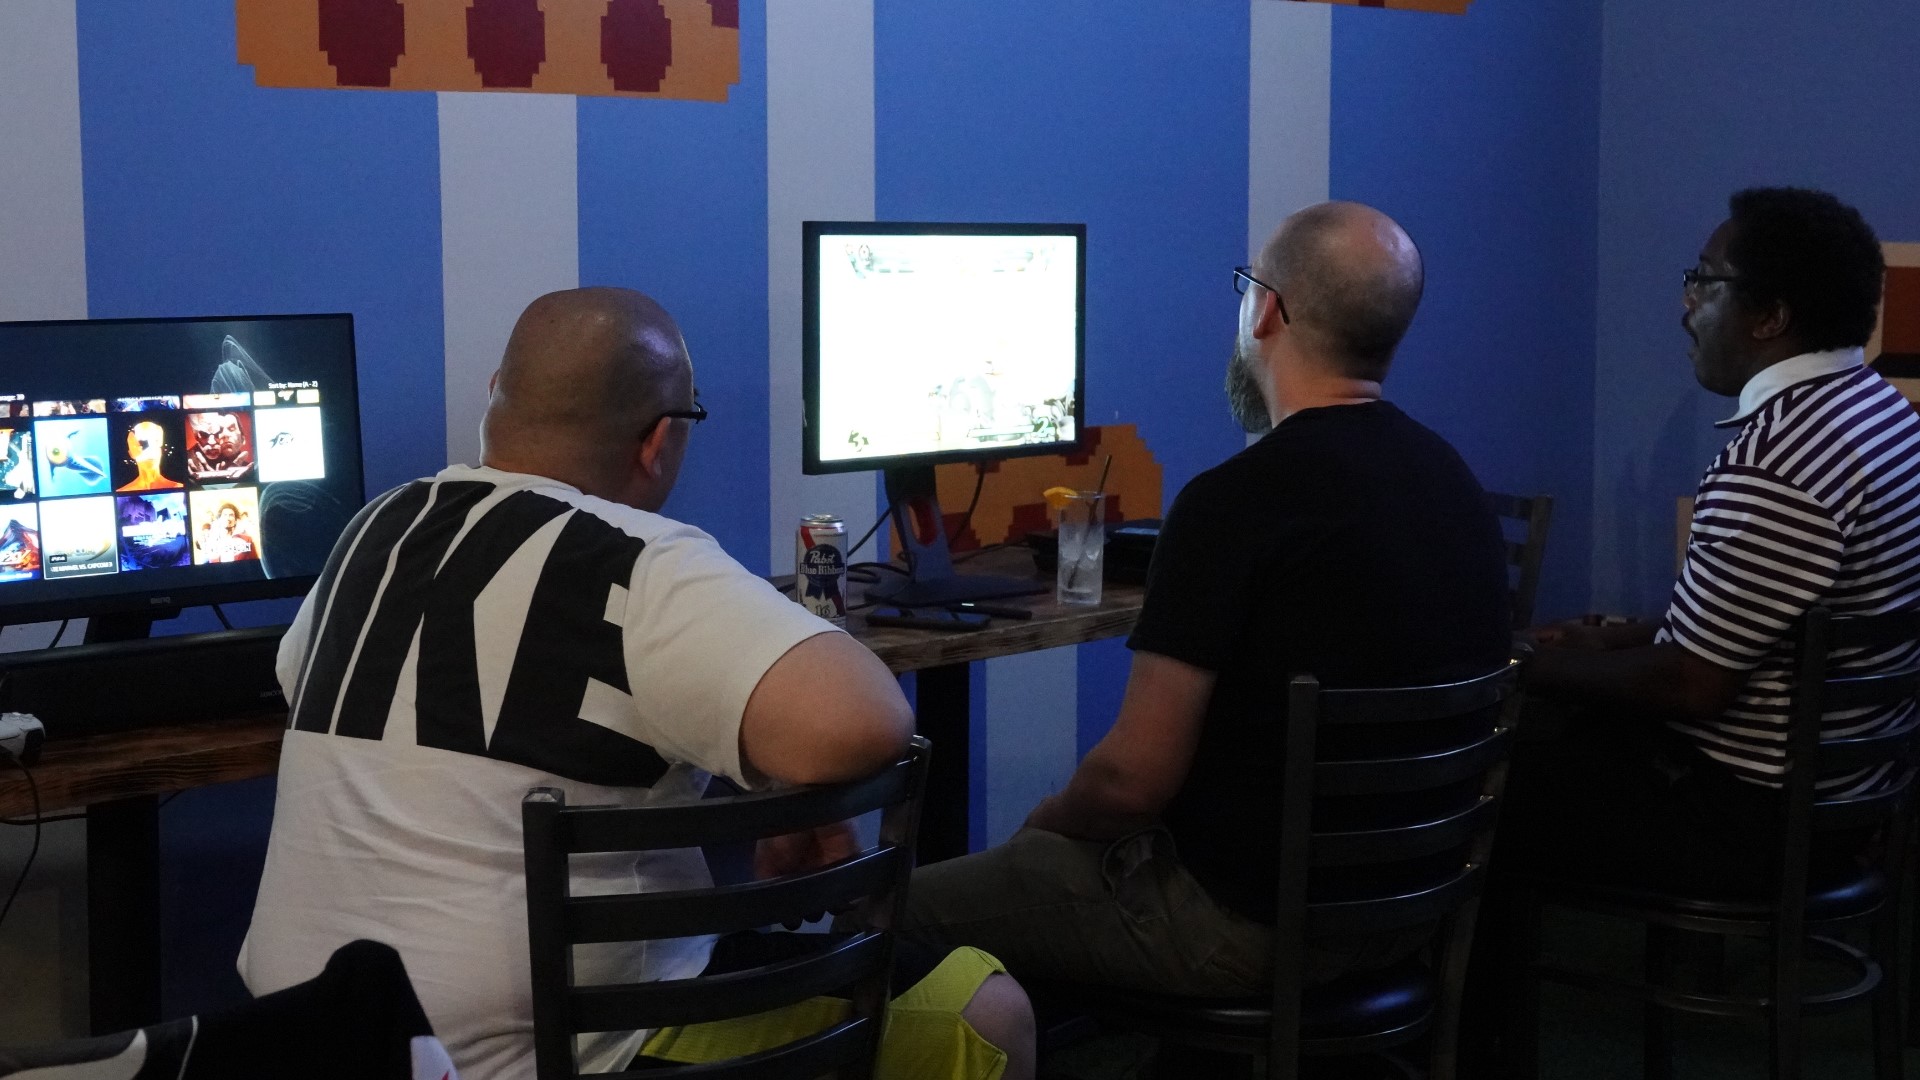 Reboot Retrocade Gaming is a competitive gaming group that meets in downtown Macon on Thursdays.